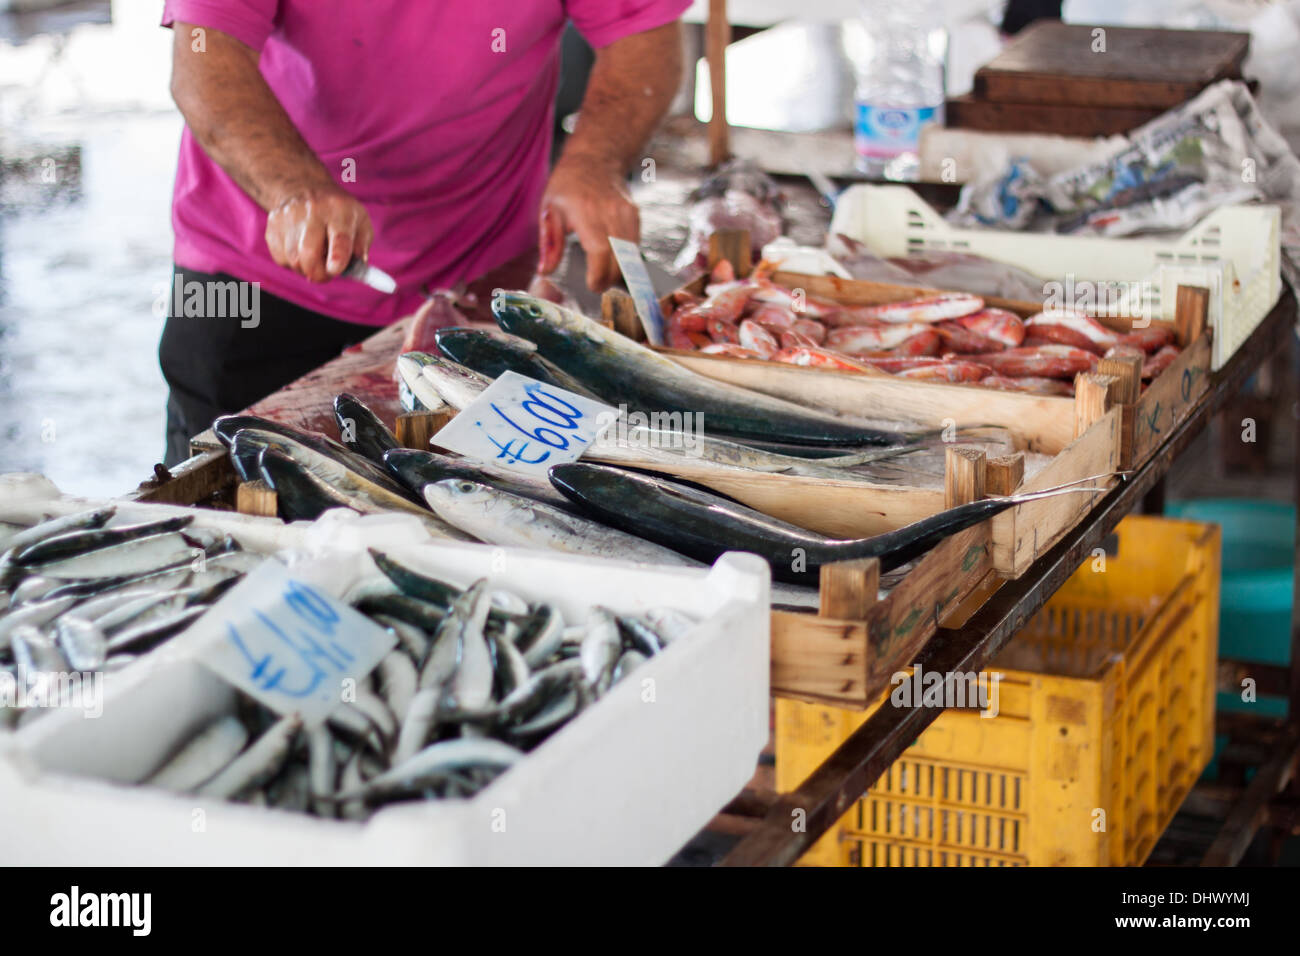 fresh fish 'fish market' marker seller sell price box container Stock Photo